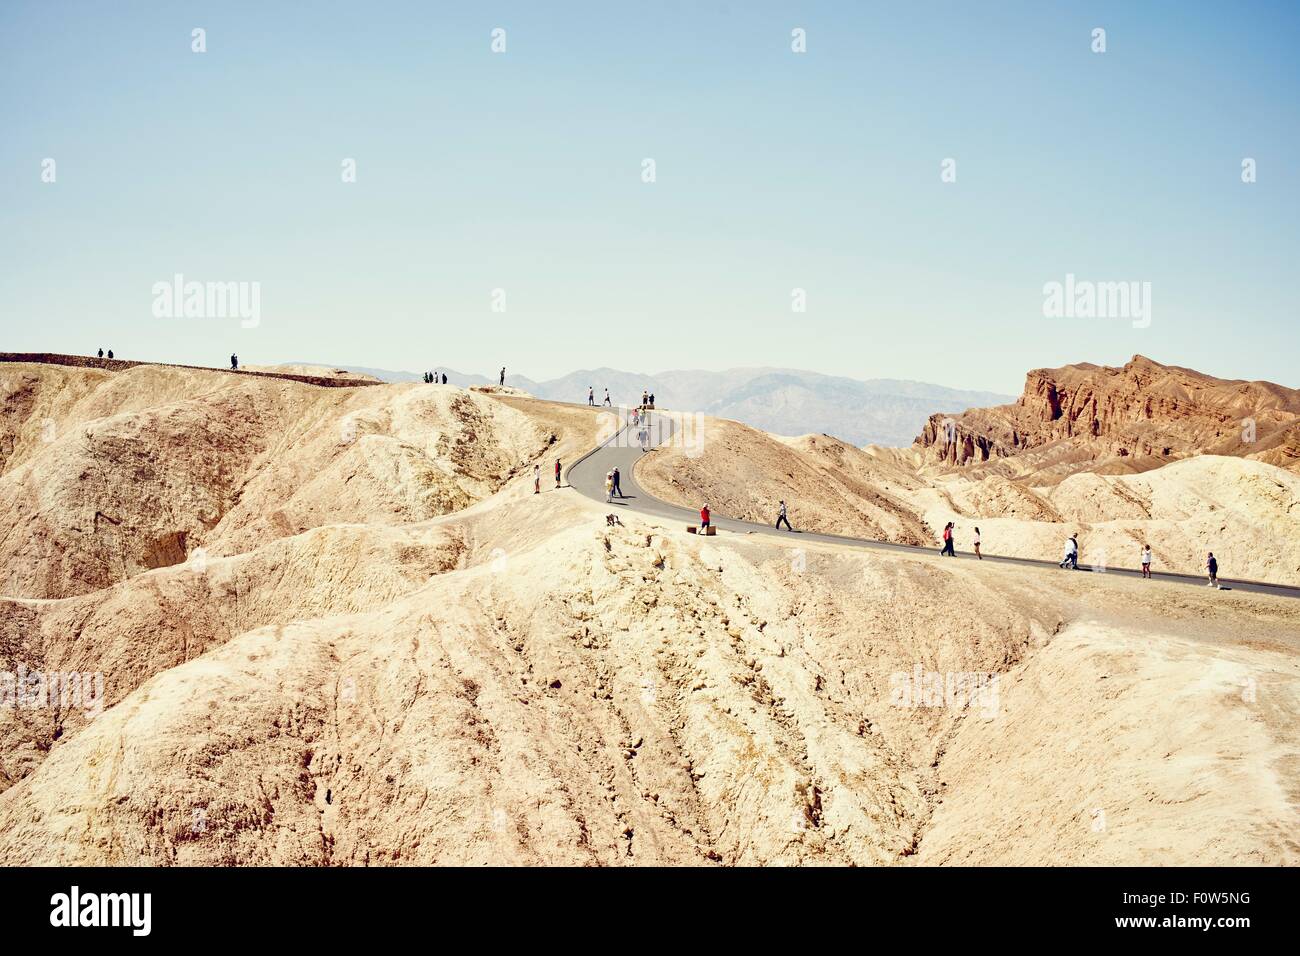 View of tourists on winding road, Zabriskie Point, Death Valley, California, USA Stock Photo